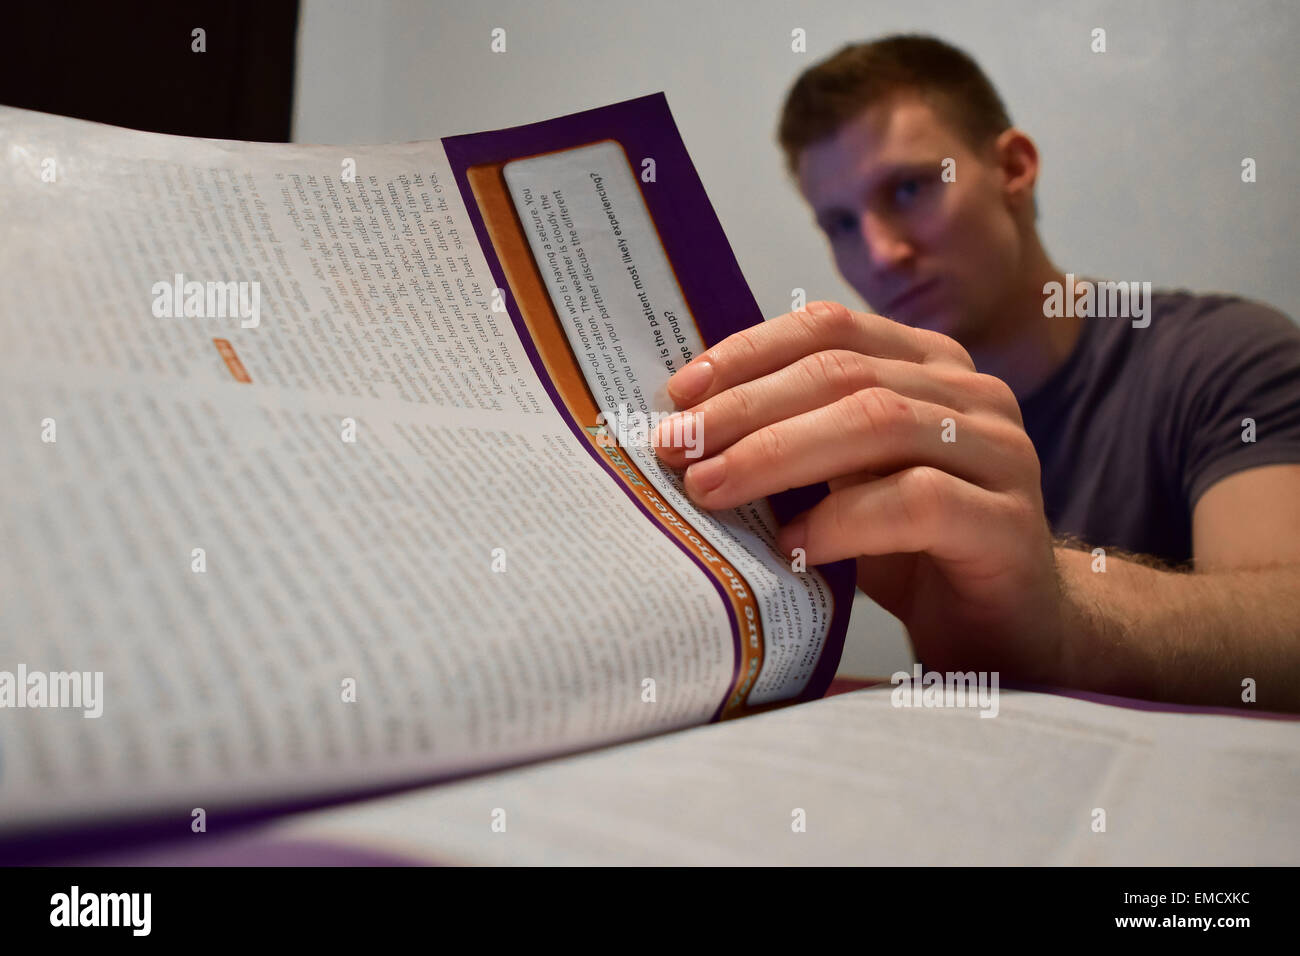 A college student studies for his final exams as a medical student. Stock Photo